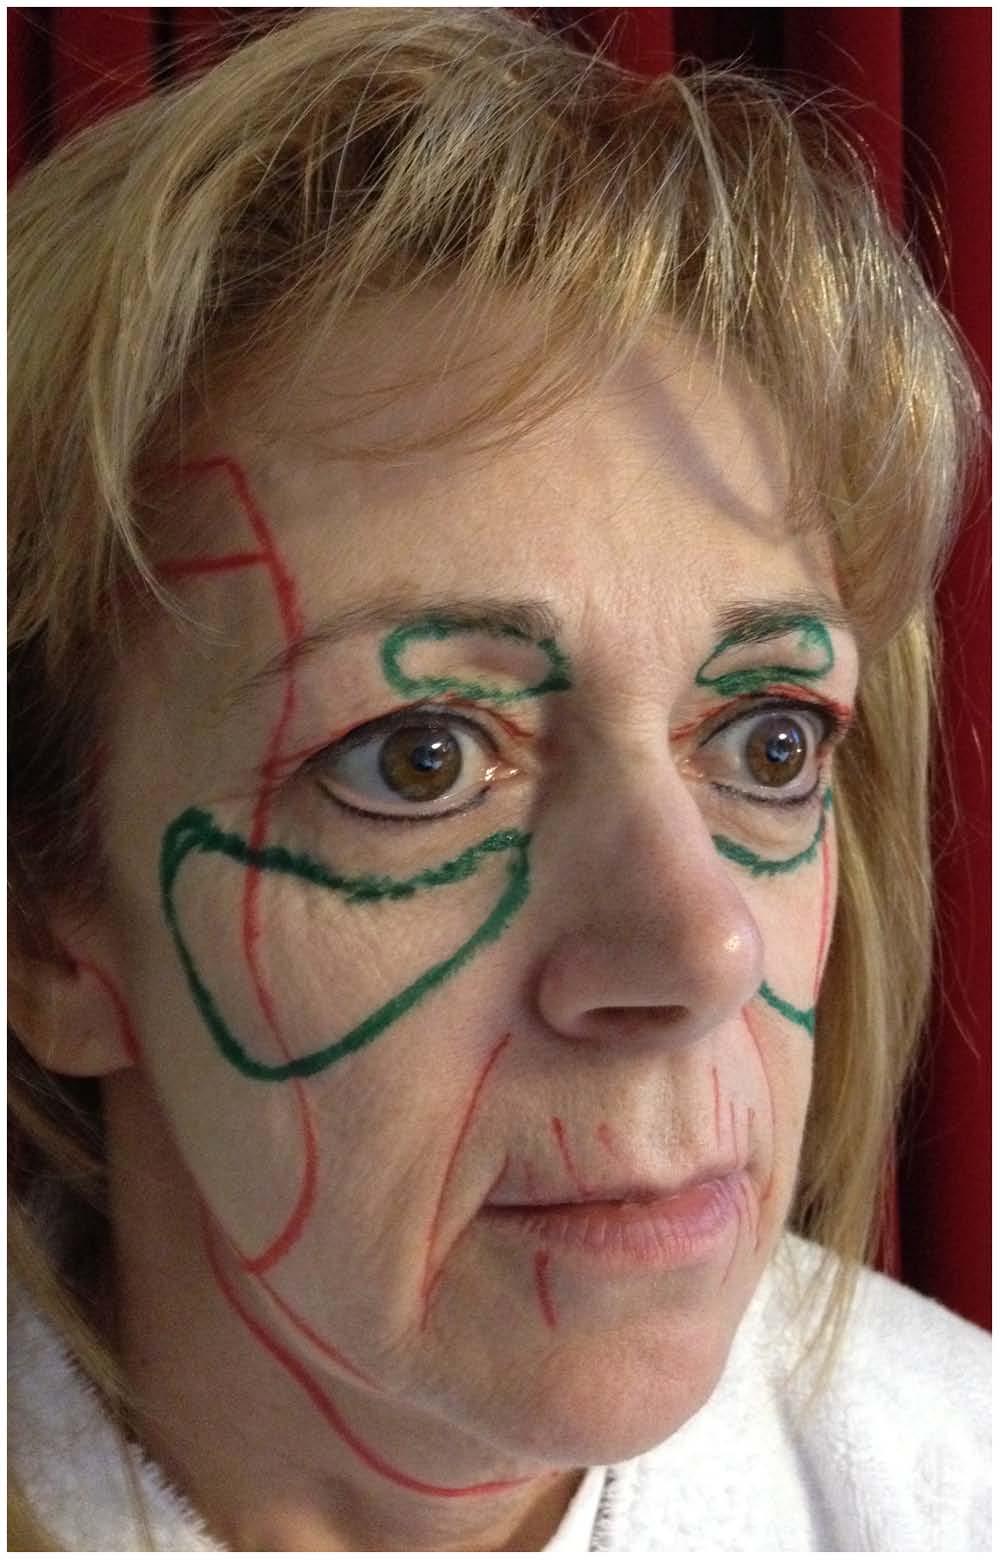 344 Aesthetic Surgery Journal 33(3) Figure 4. Typical markings for an augmentation blepharoplasty procedure. The periorbital areas to be augmented are marked in green. In the upper eyelid, 0.5 to 2.